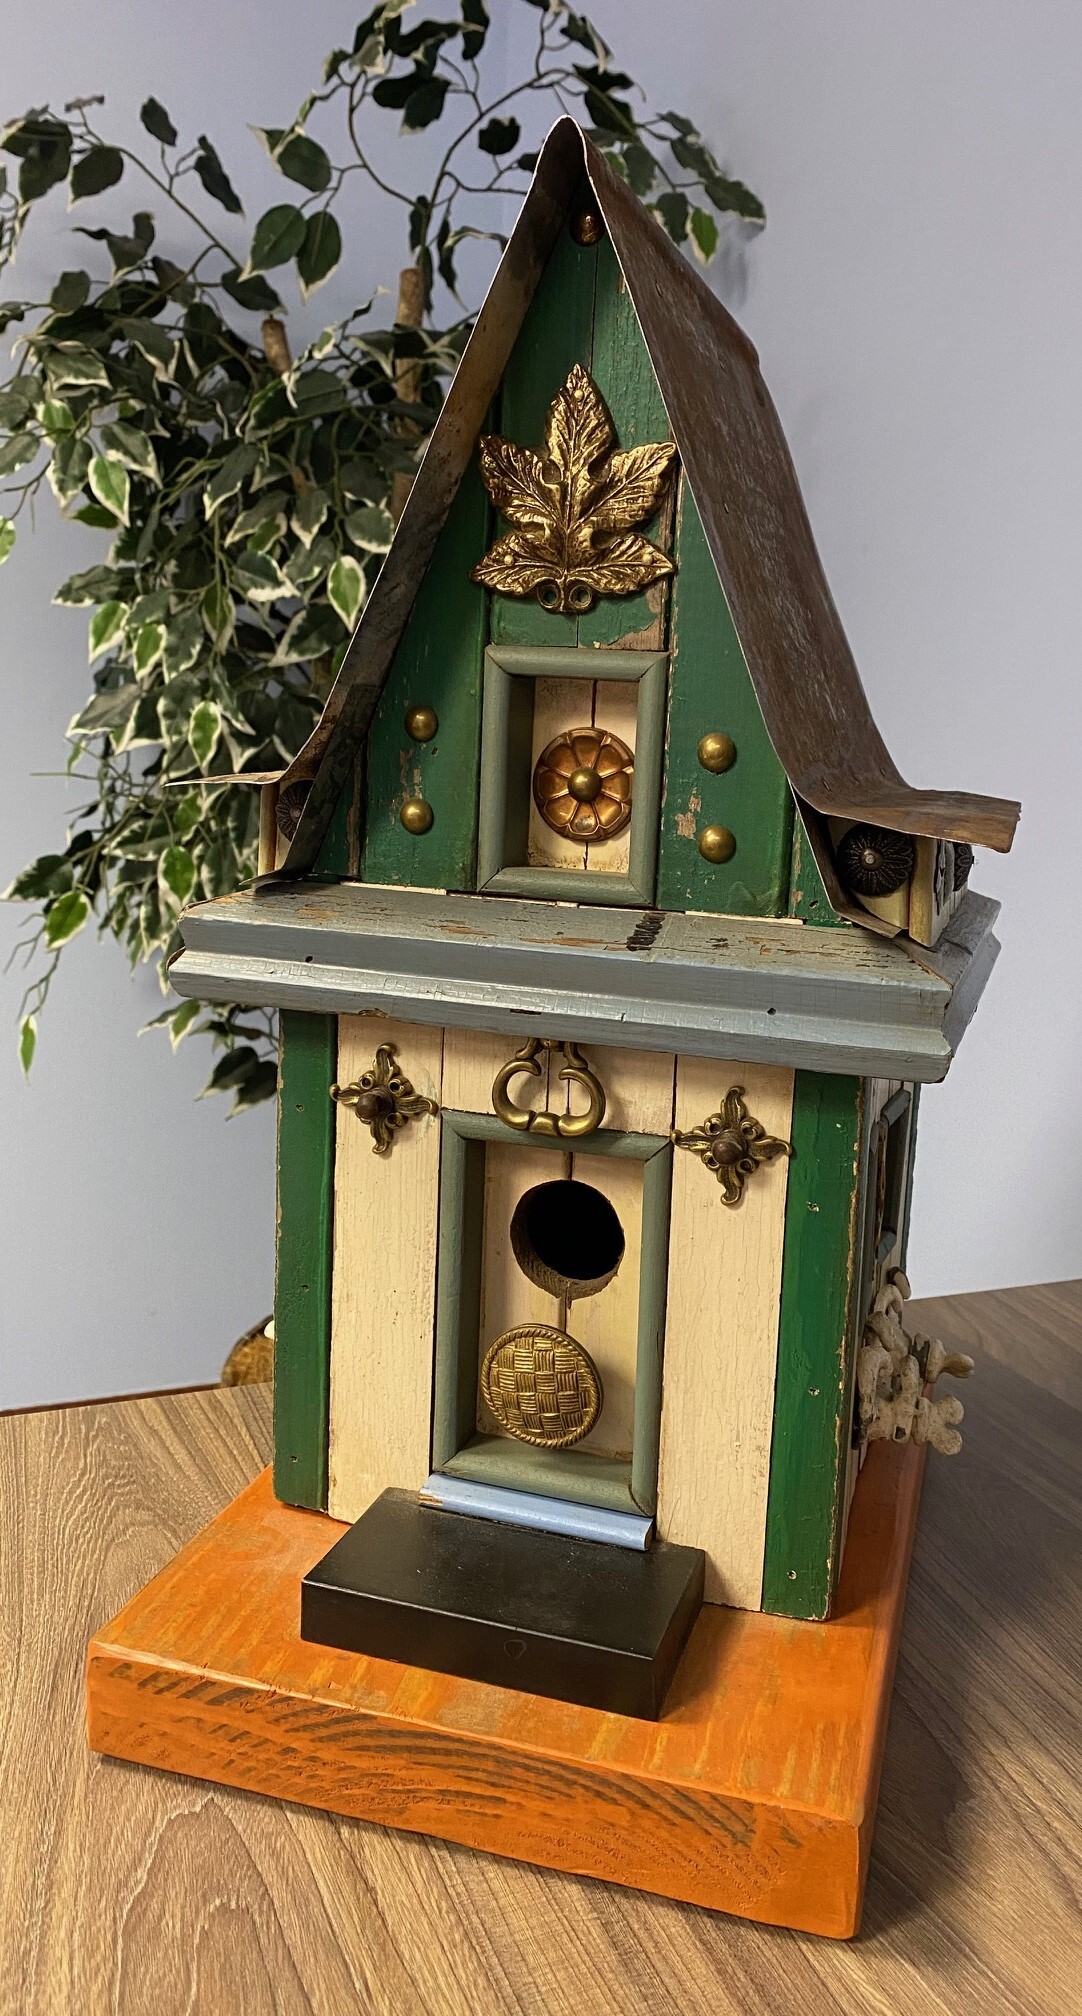 One Ticket for the Traveling Birdhouse Raffle